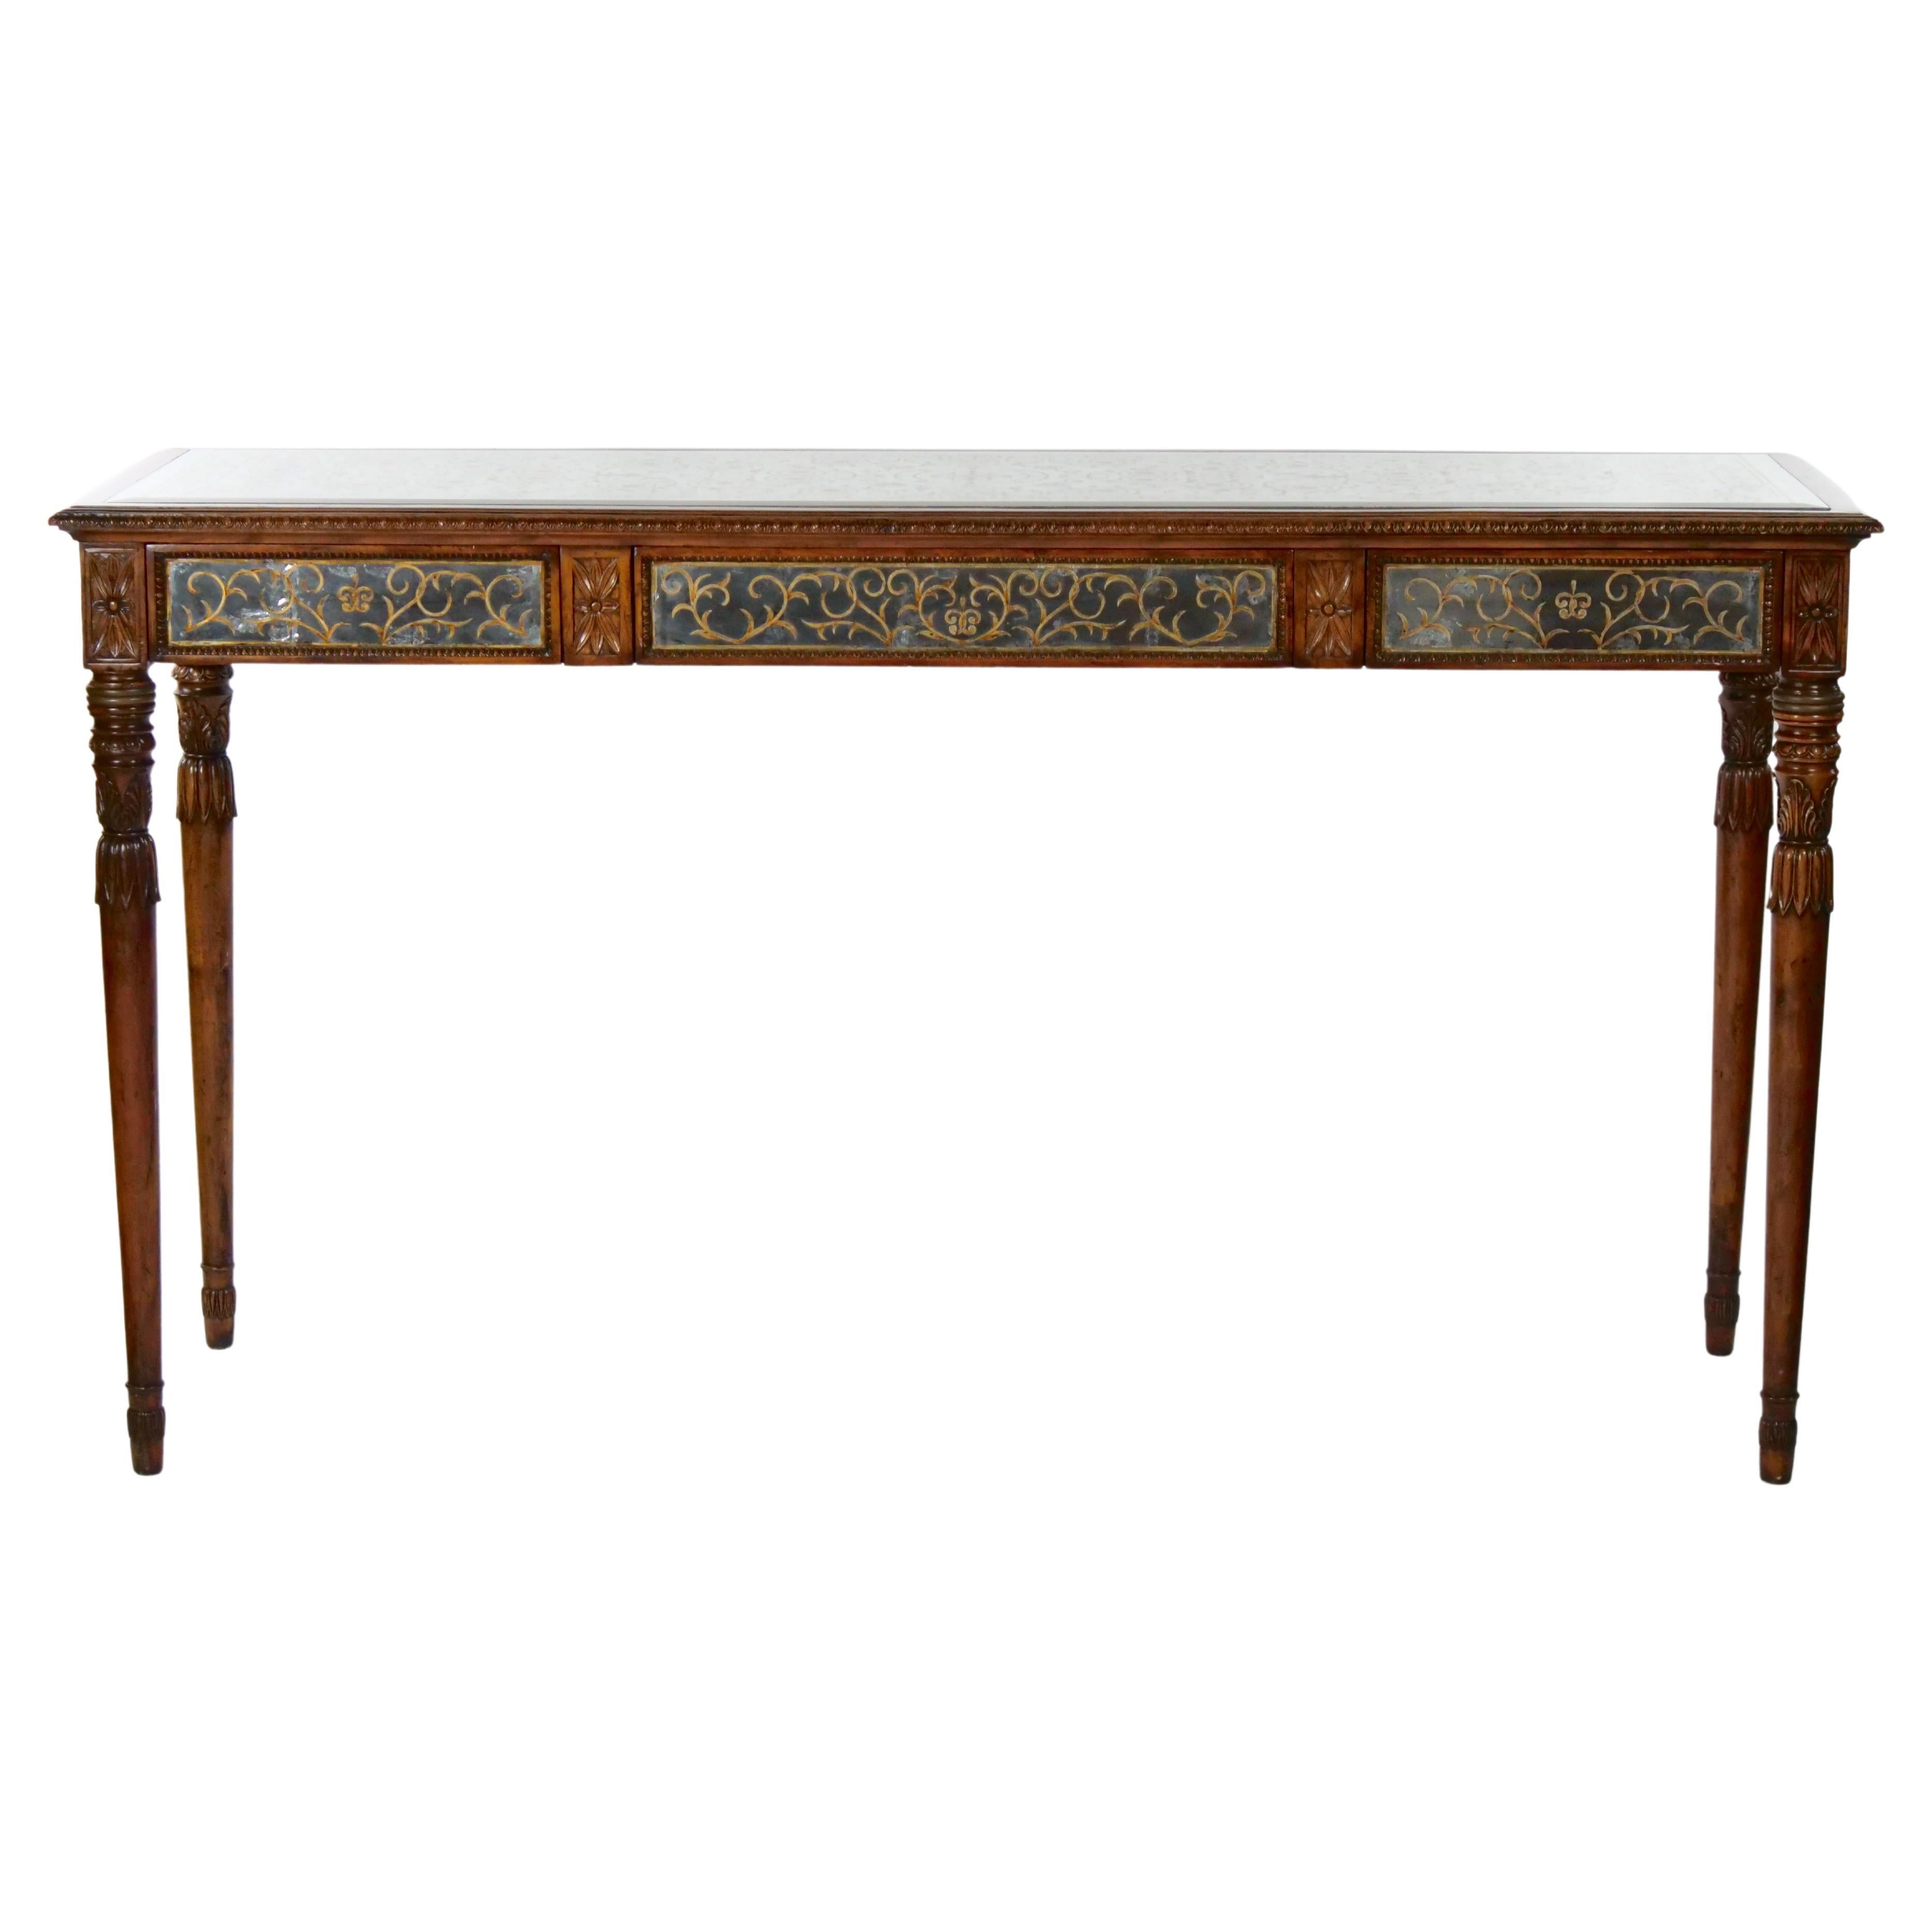 English Wood Framed Mirrored Regency Console Table